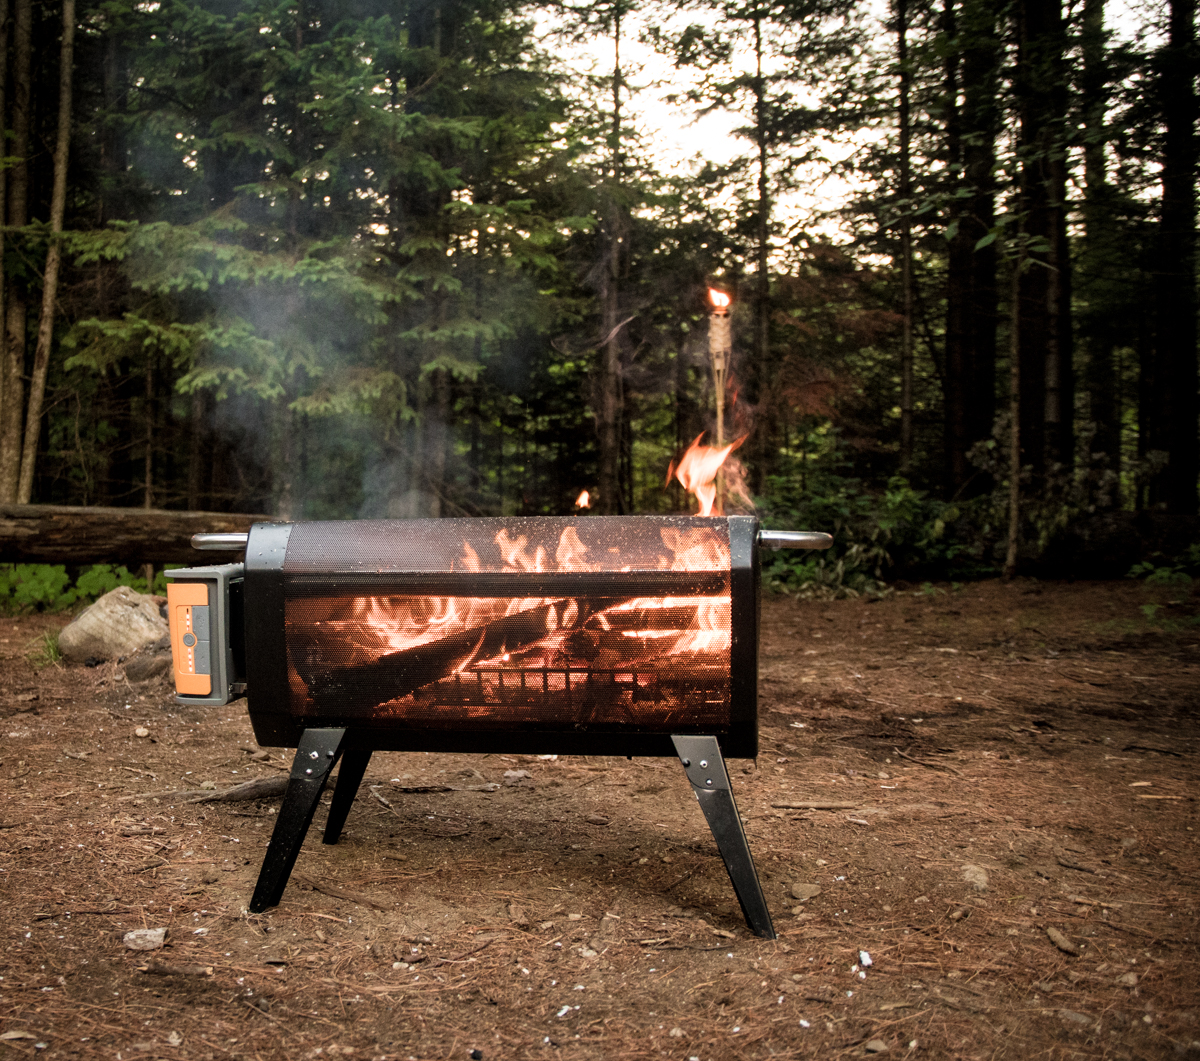 Biolite Firepit Review – Worth the Money?